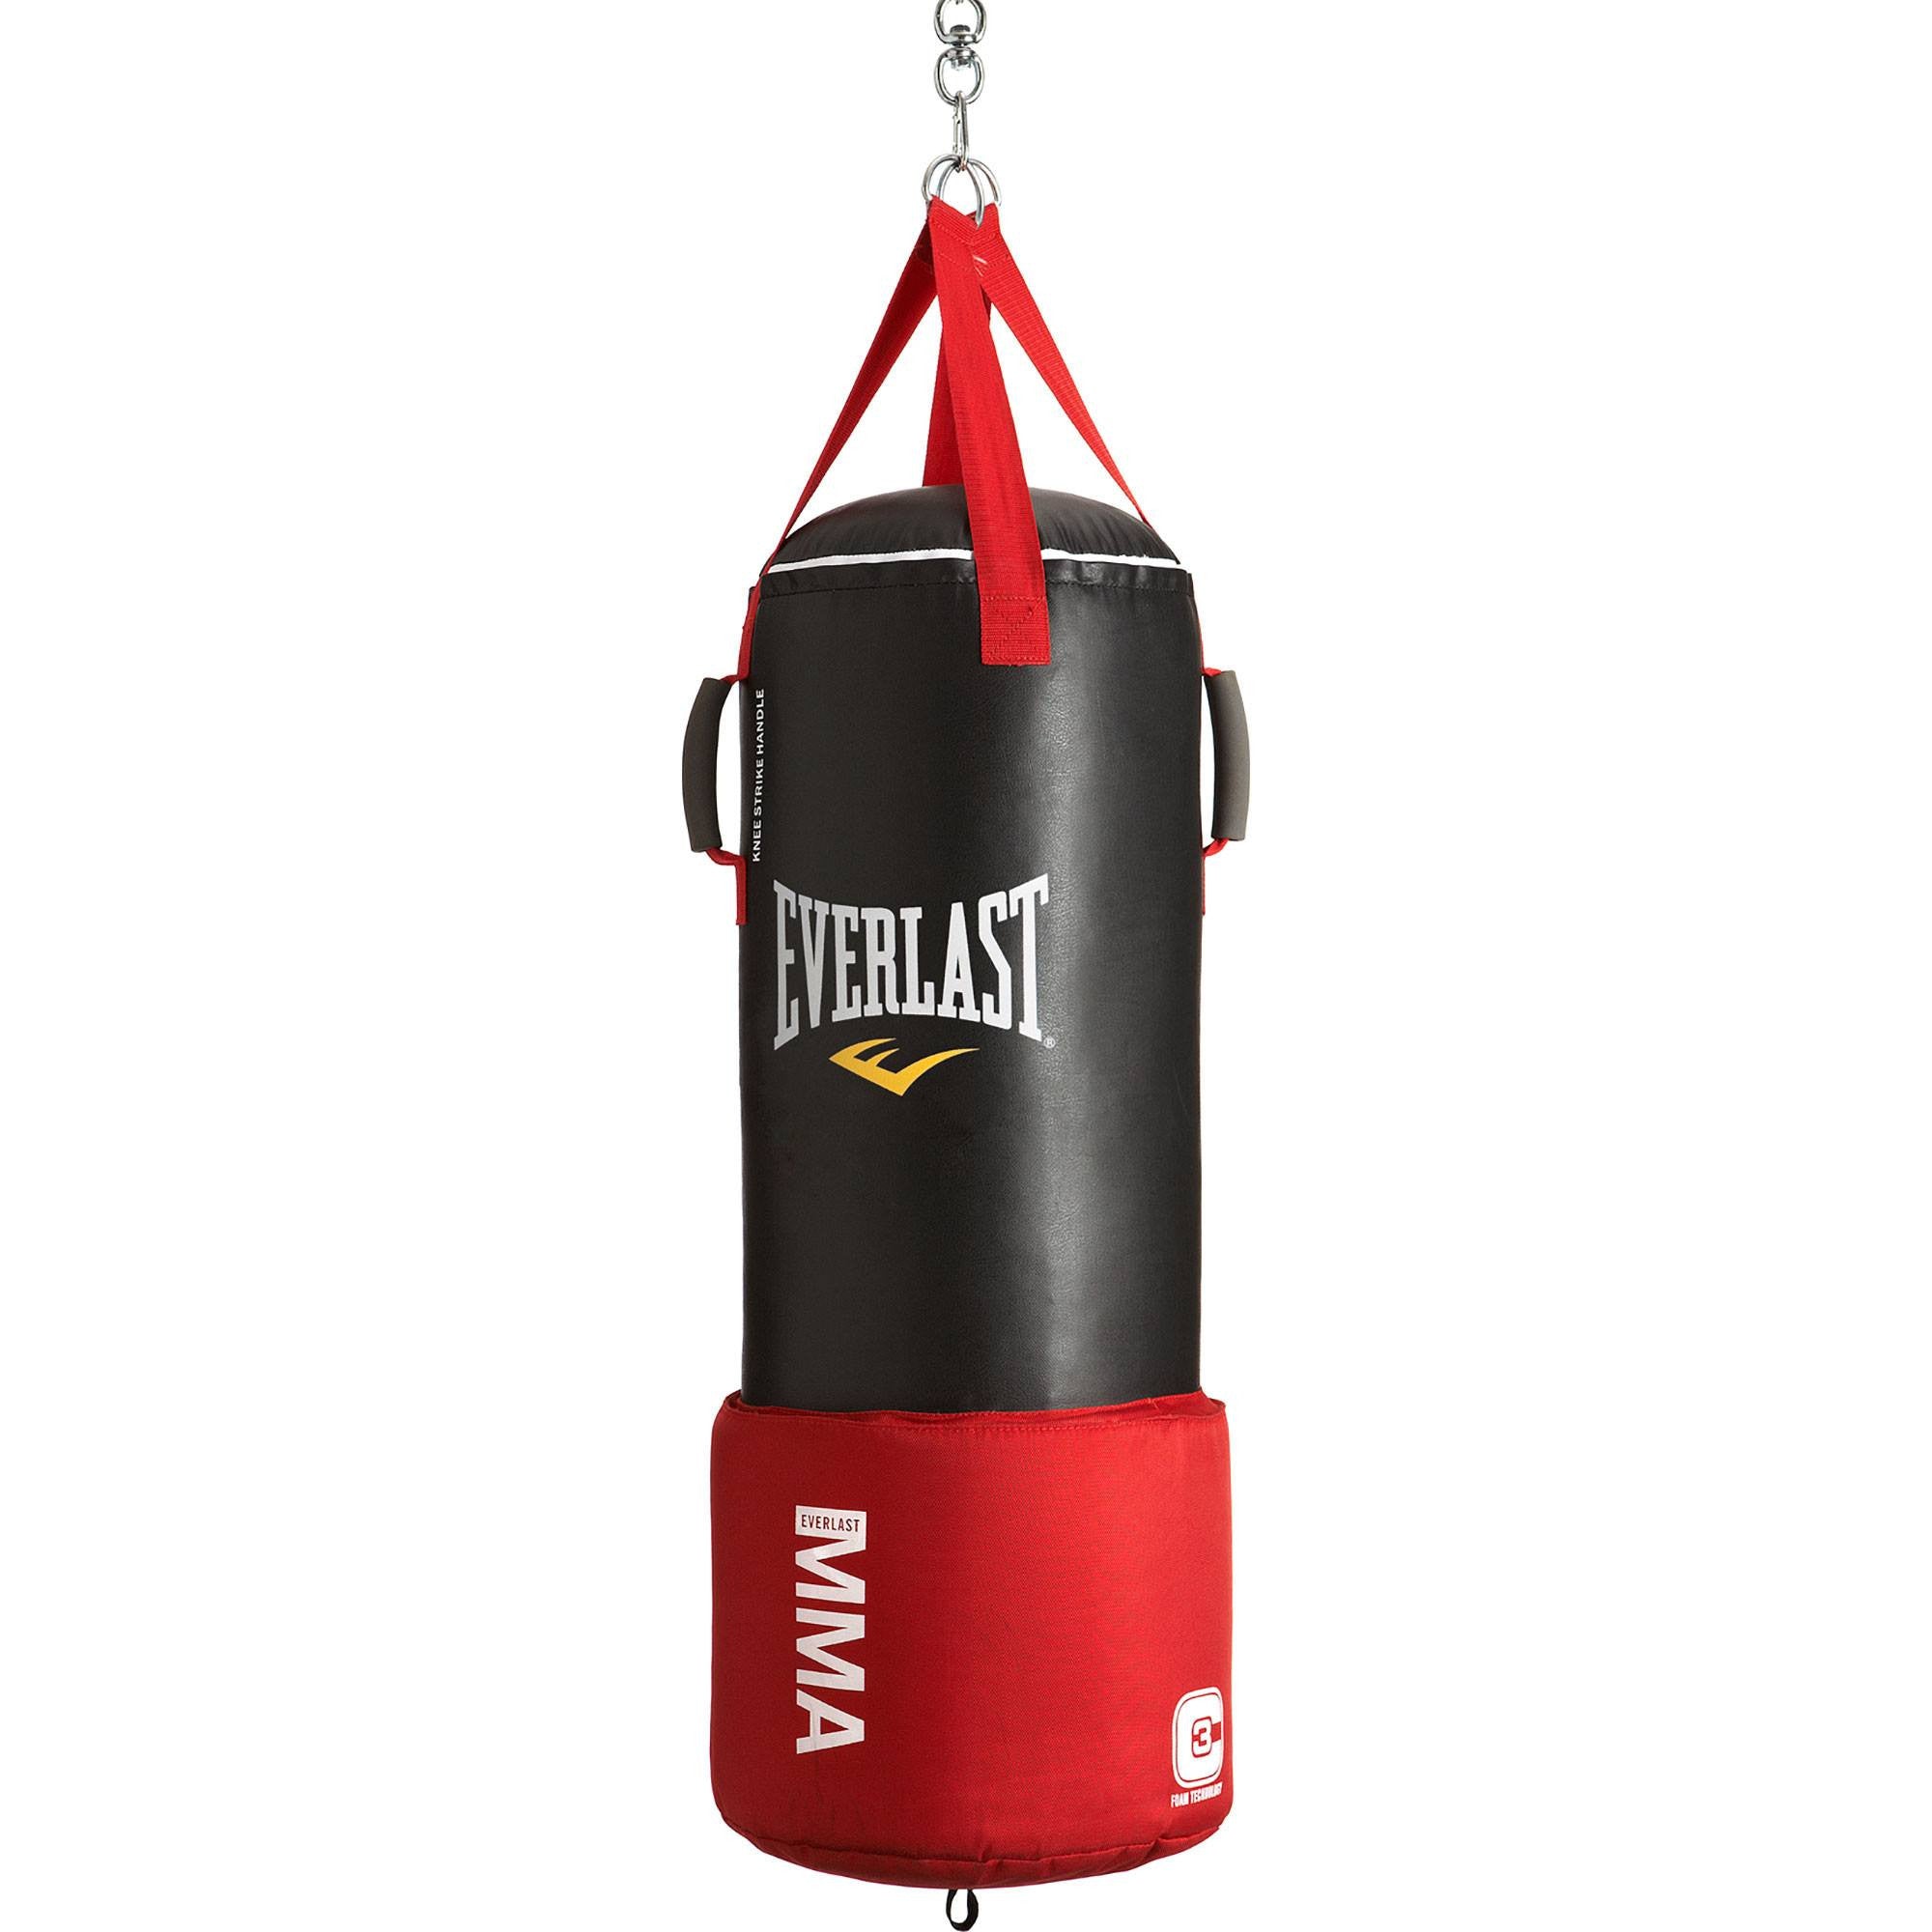 Everlast Heavy Duty Boxing Bag | Literacy Ontario Central South